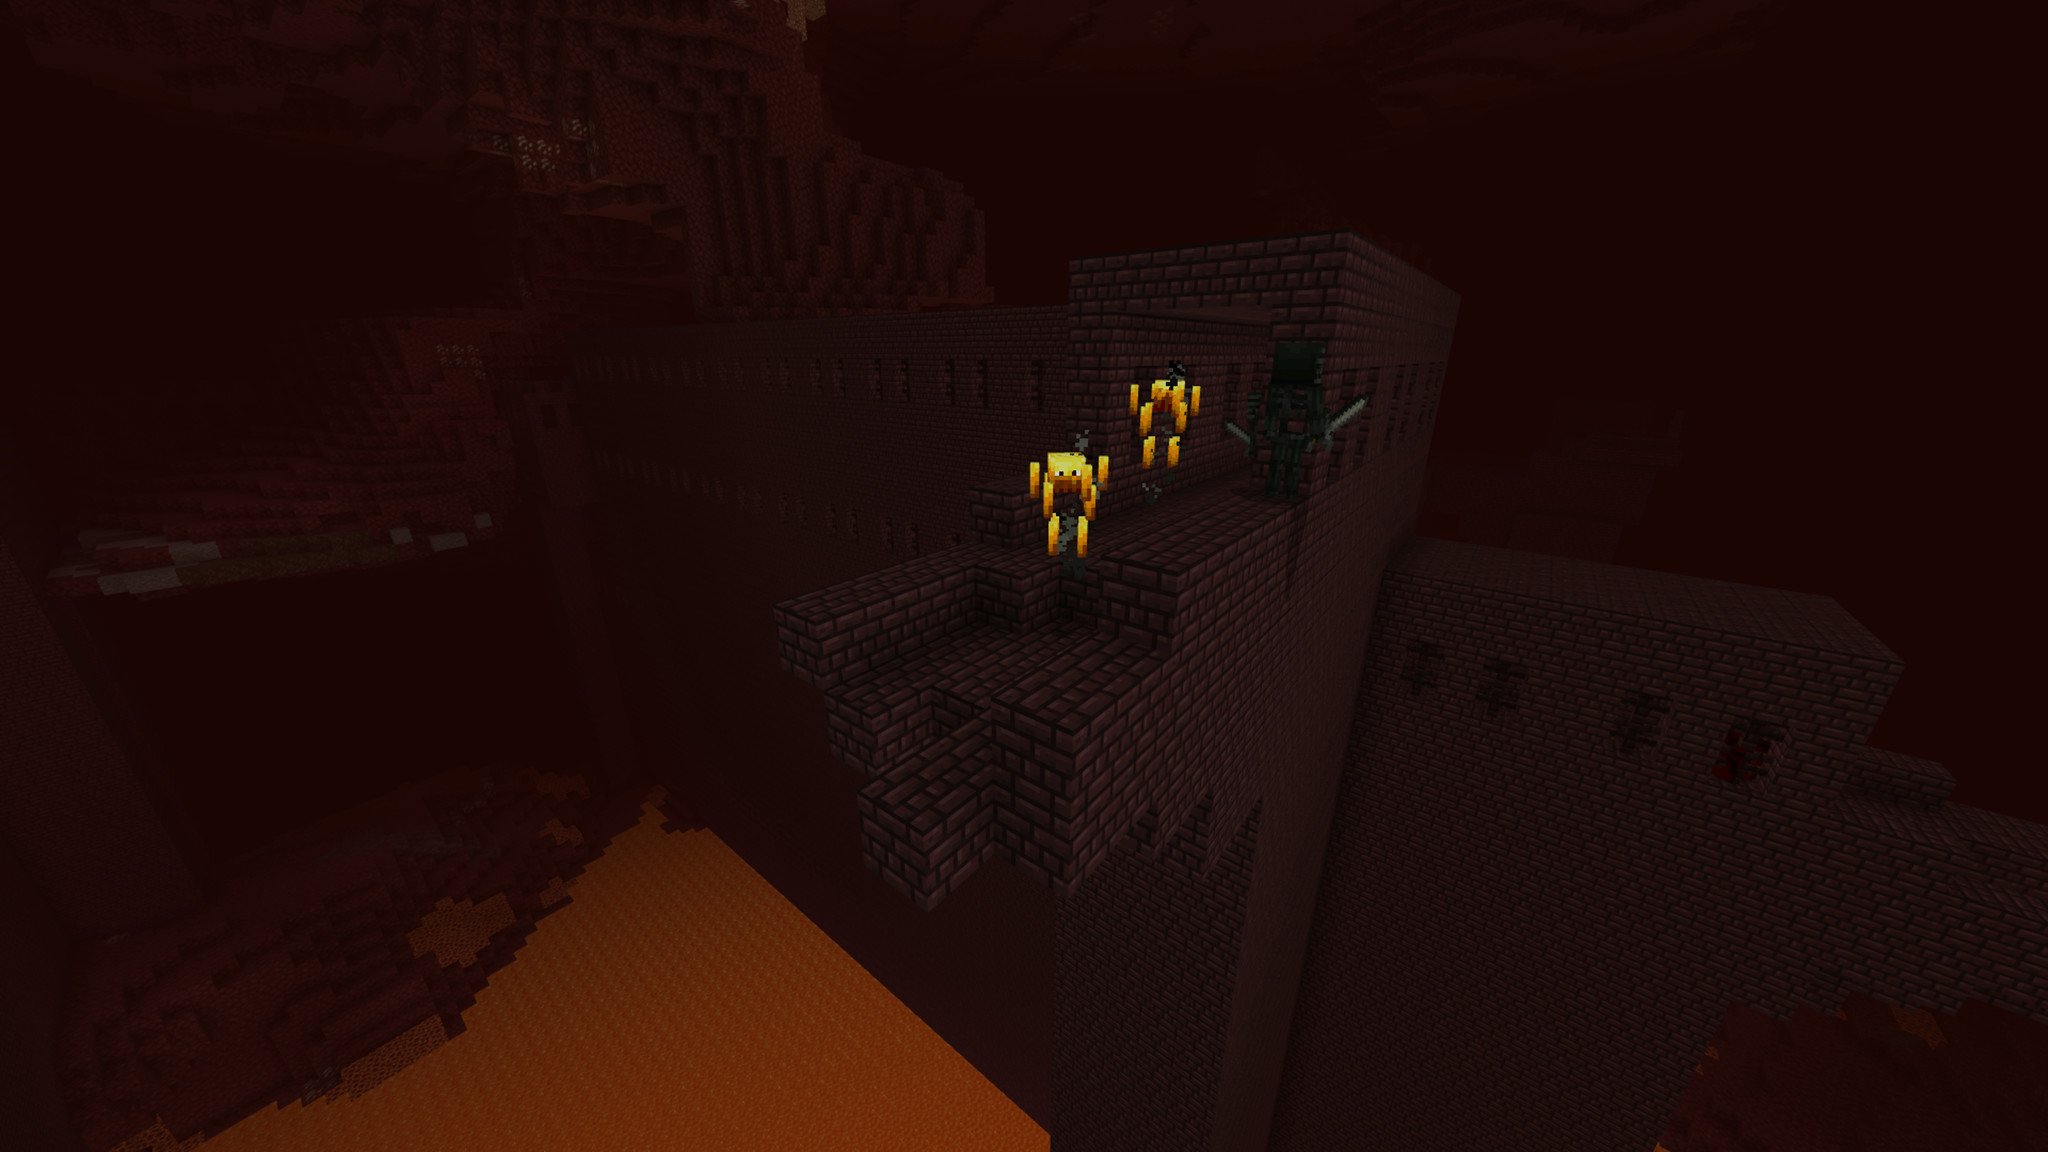 Couple Nether mobs chilling in their Nether fortress